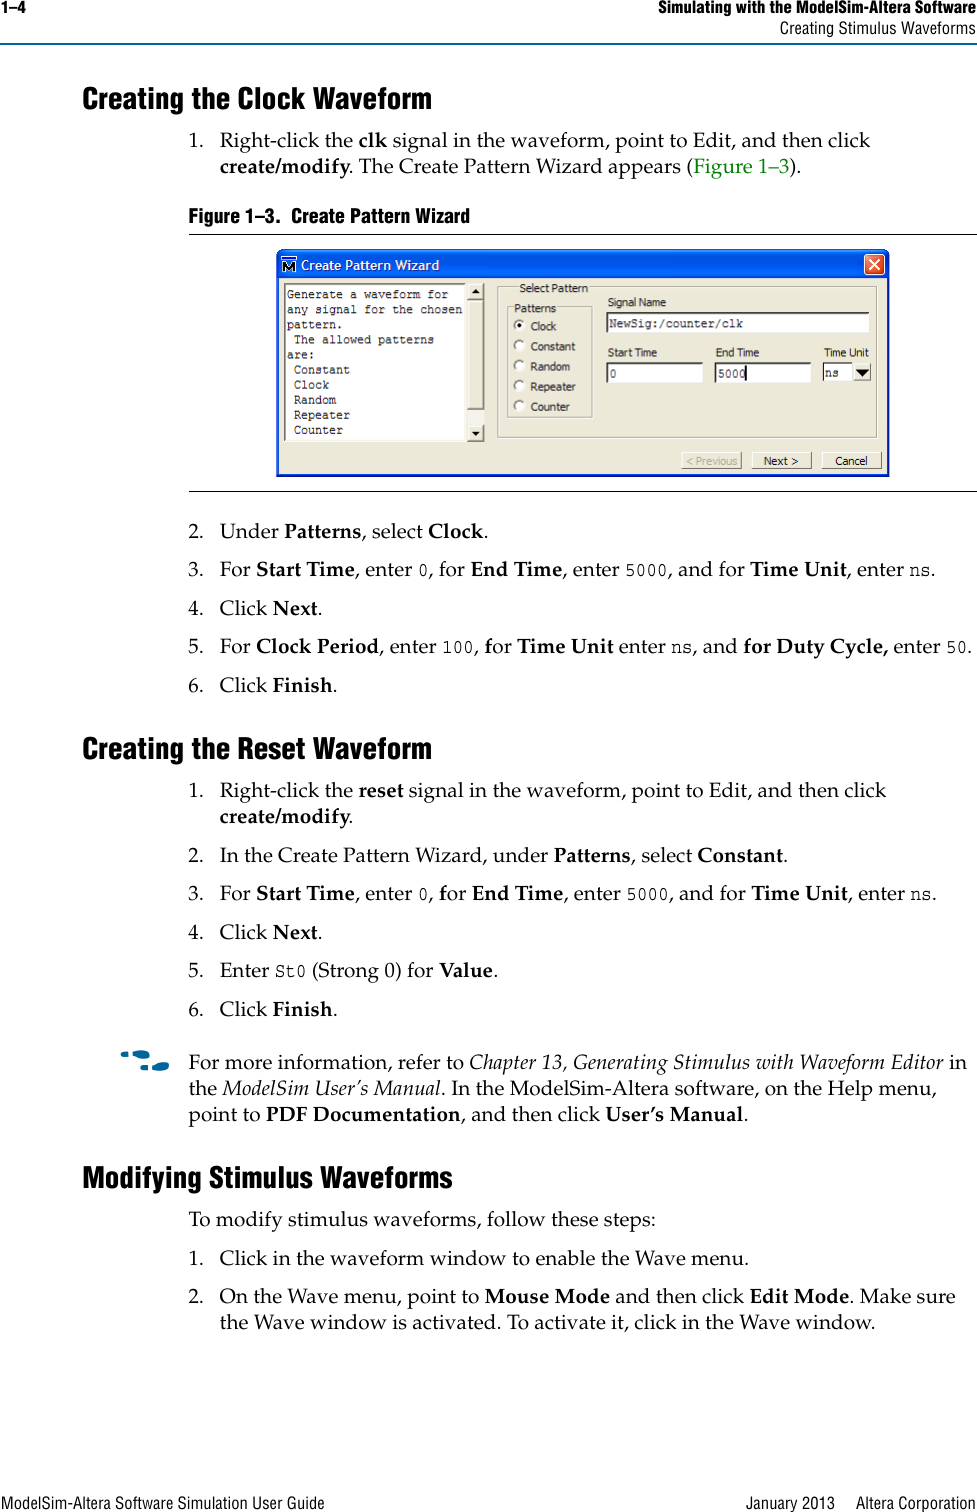 Page 6 of 12 - Sim-Altera Software Simulation User Guide